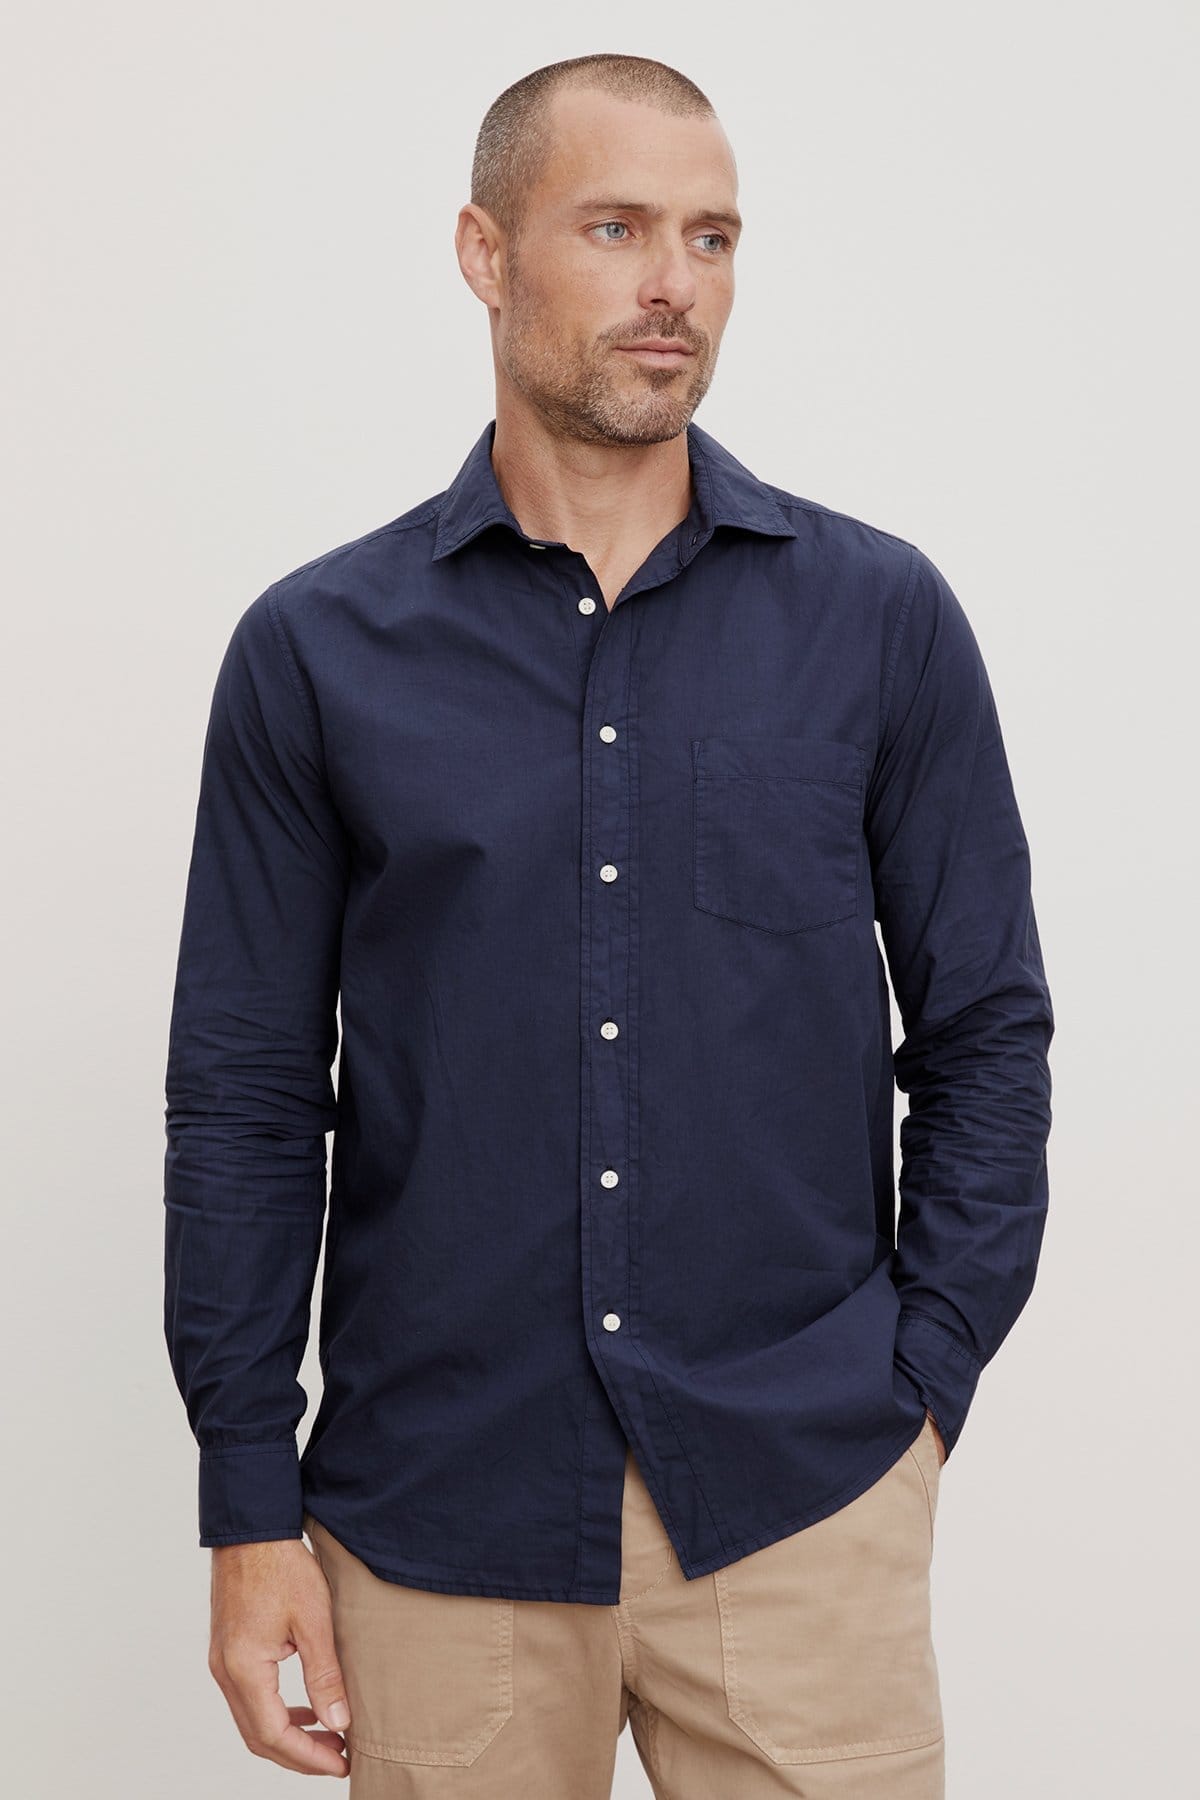 Model wearing the Brooks Button-Up Shirt